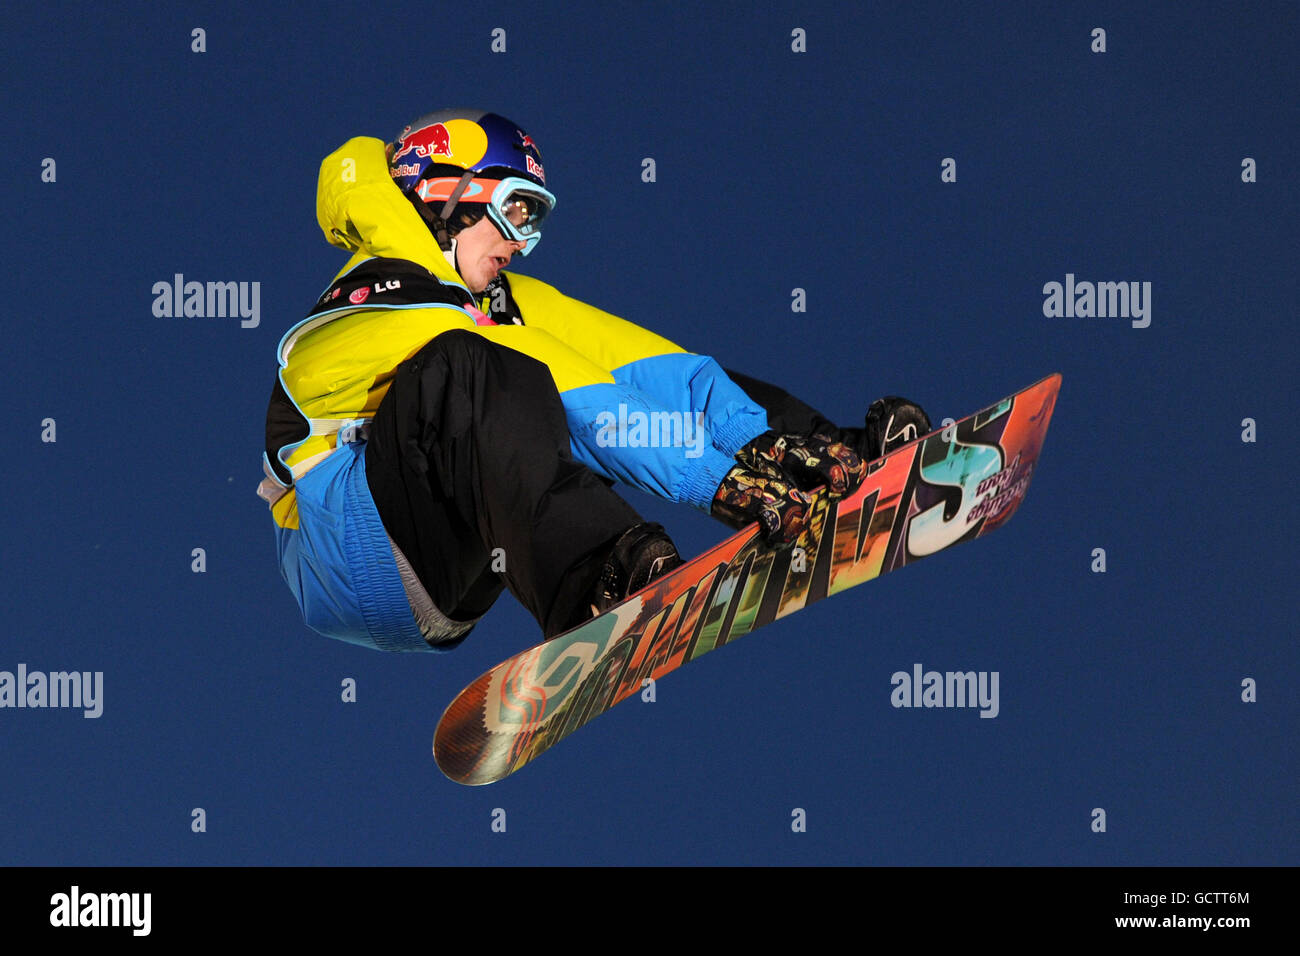 Jamie Nicholls of Great Britain during the LG Snowboard FIS World Cup in London Stock Photo